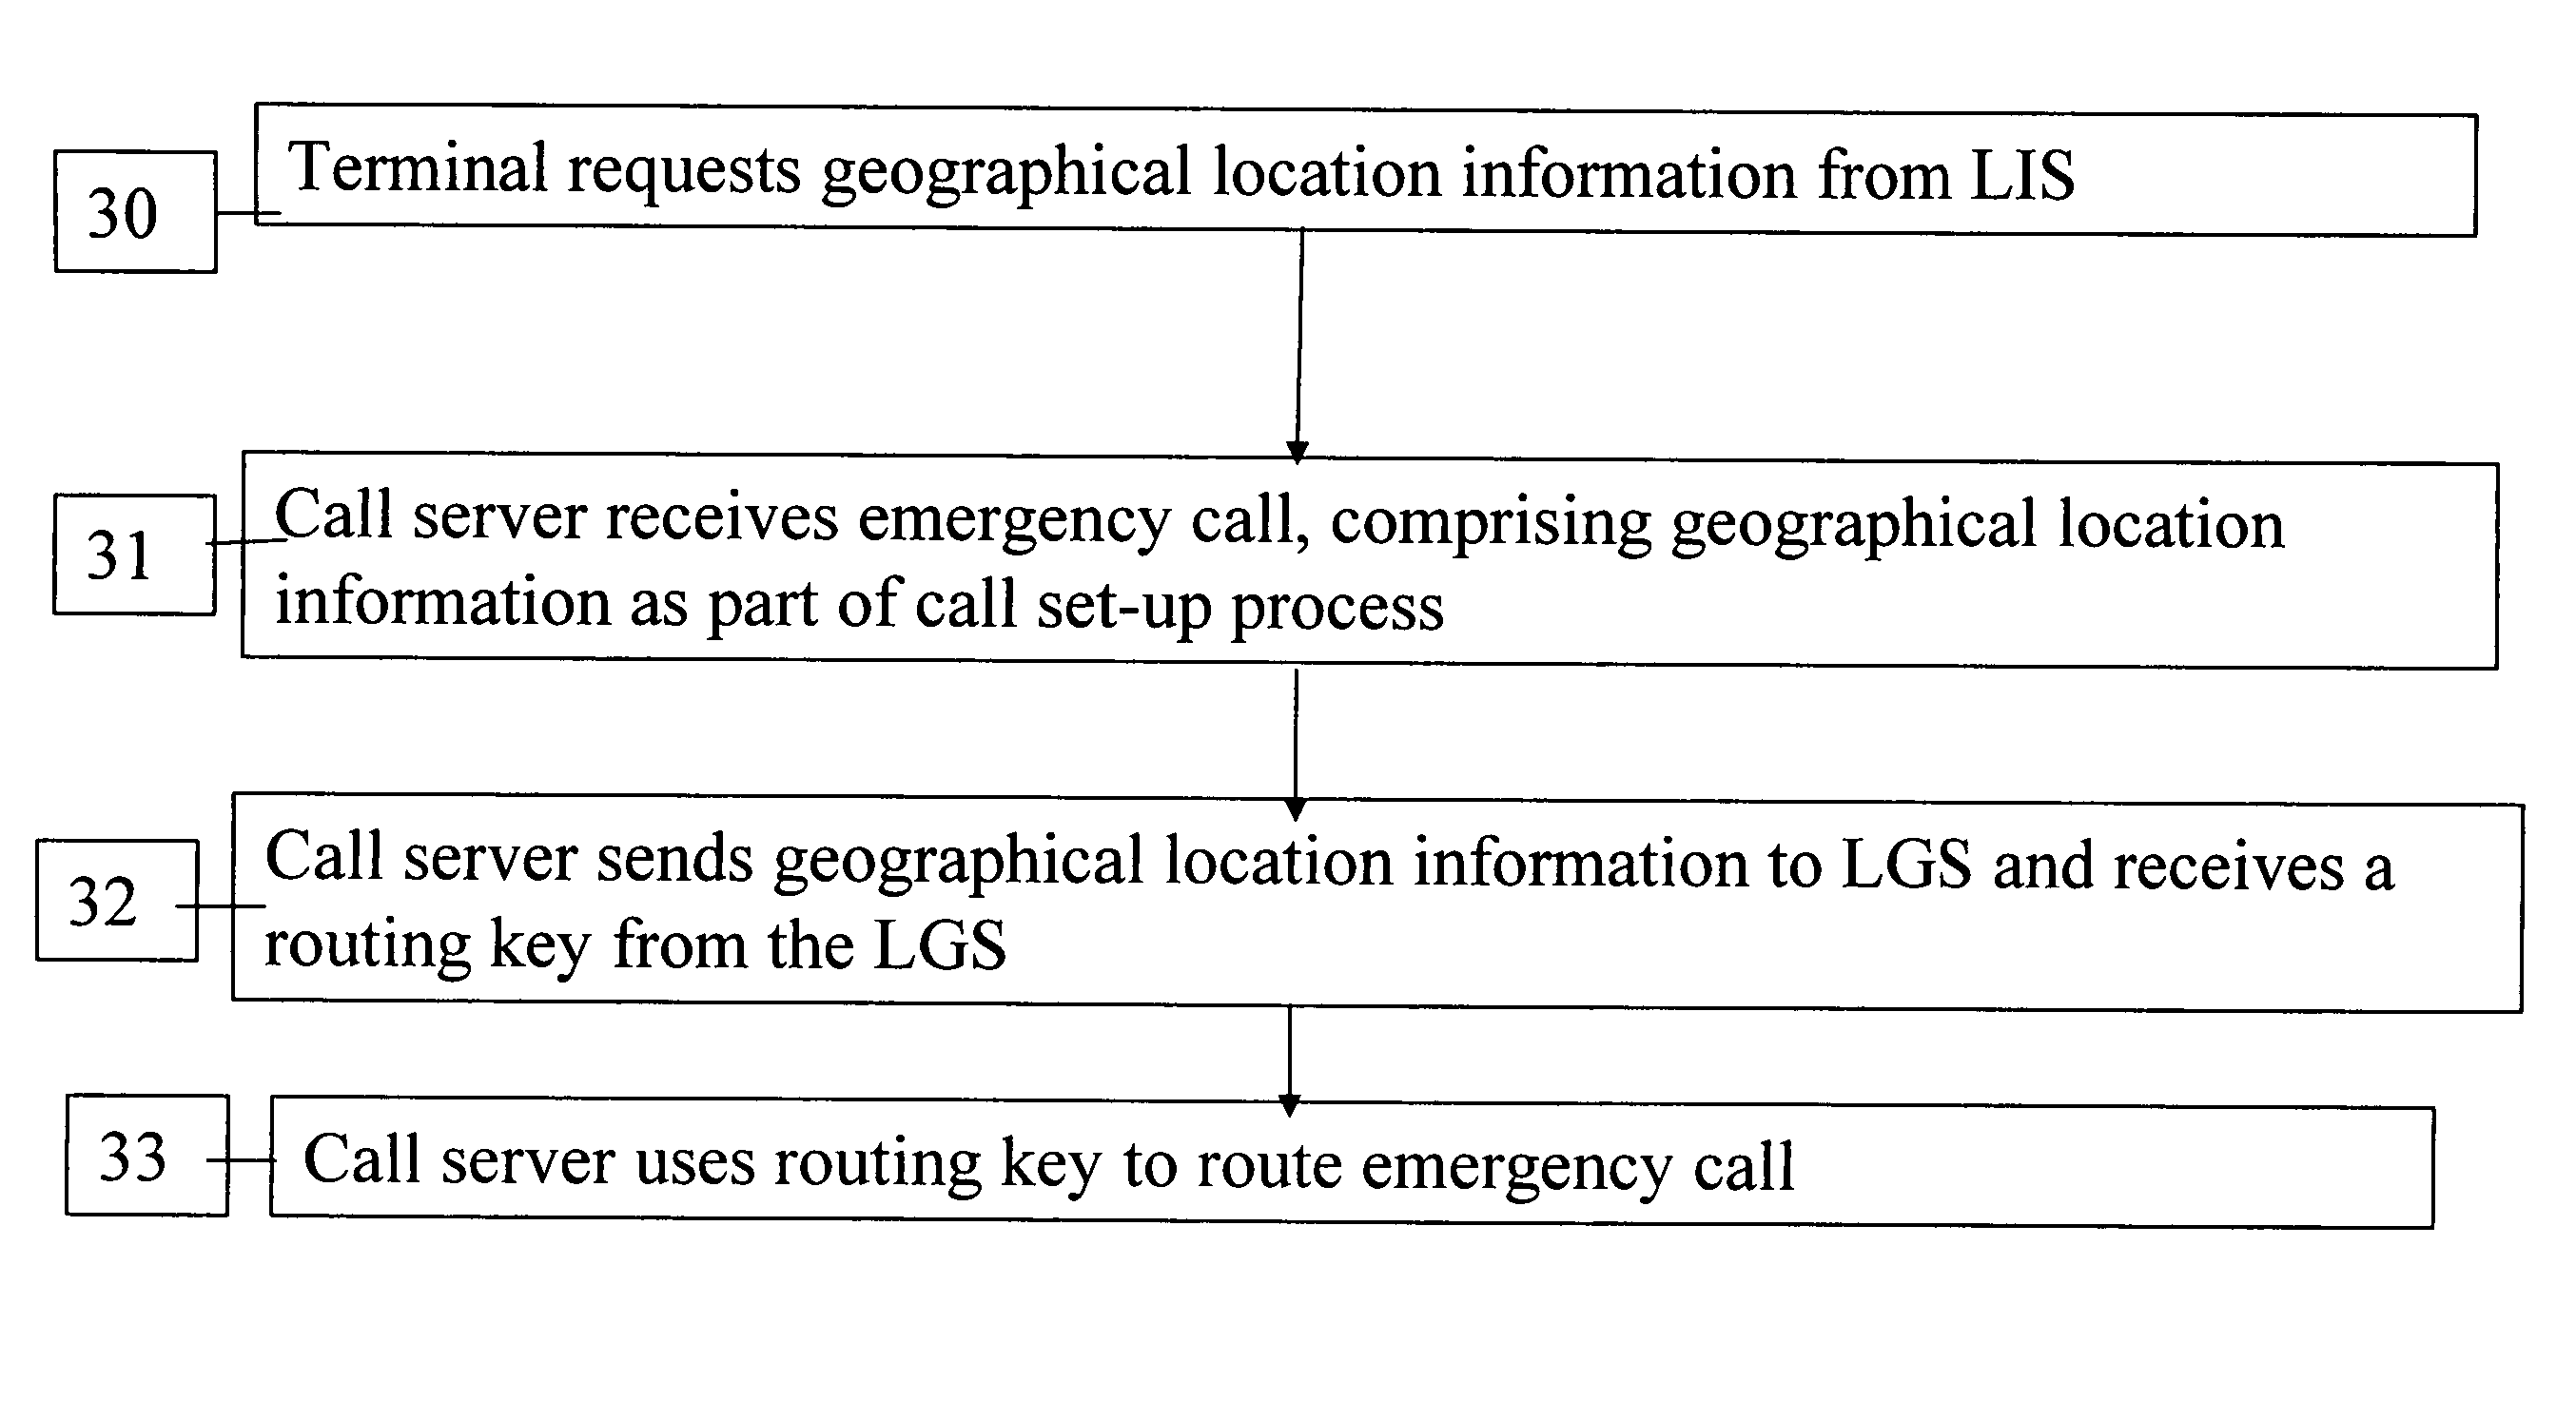 Determining the geographical location from which an emergency call originates in a packet-based communications network